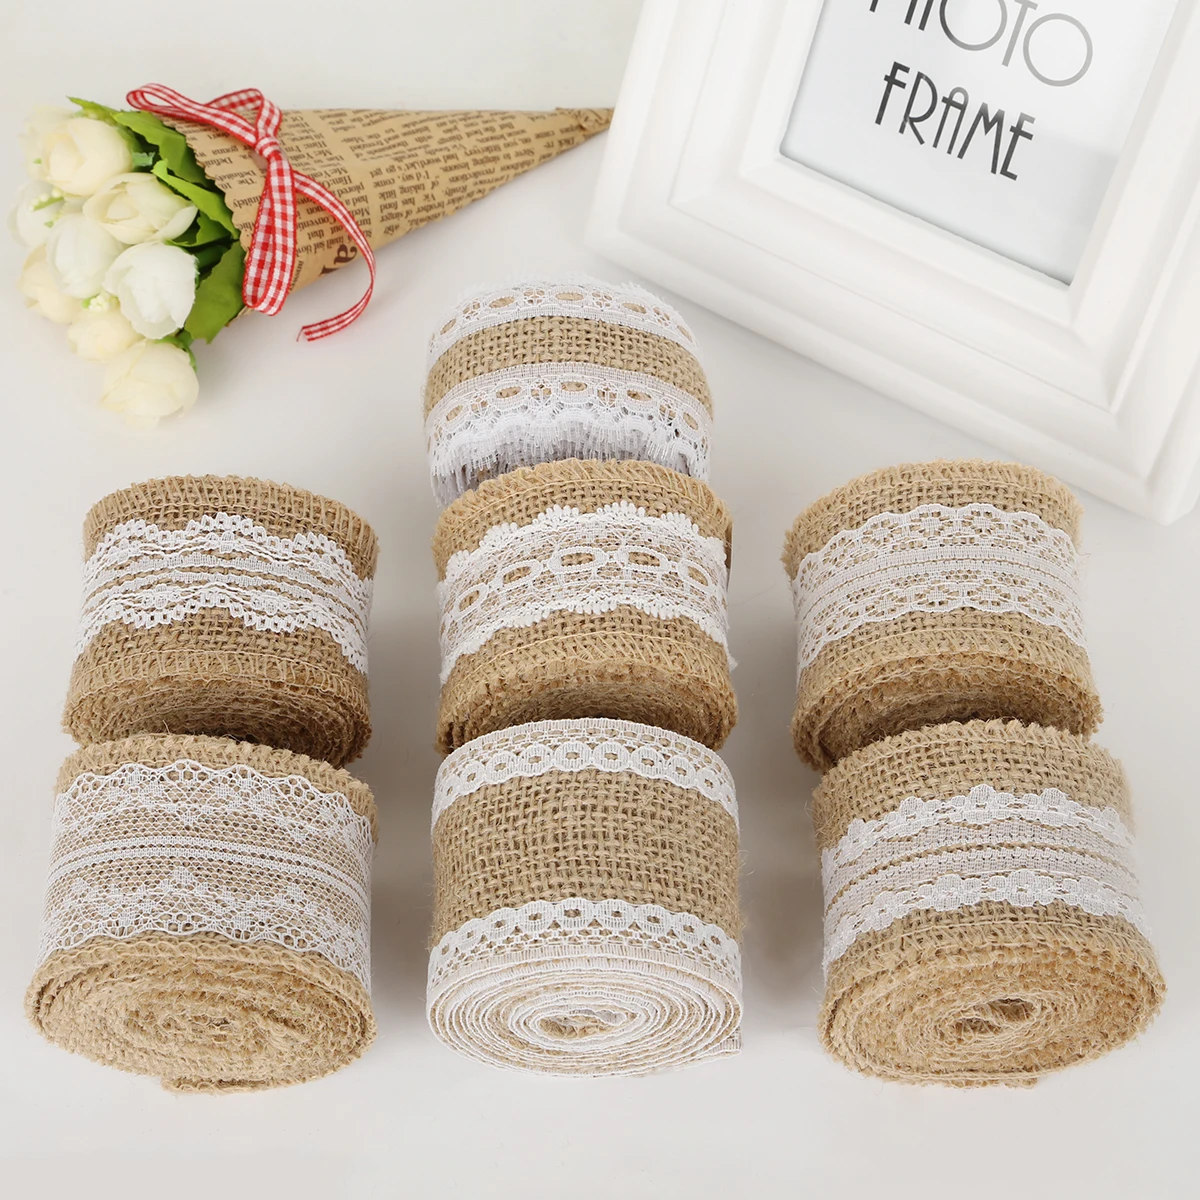 2M/Roll Width 5cm Natural Jute Rolls Burlap Hessian Ribbons with Lace Vintage Rustic Wedding Decor Ornament Party DIY Supplies